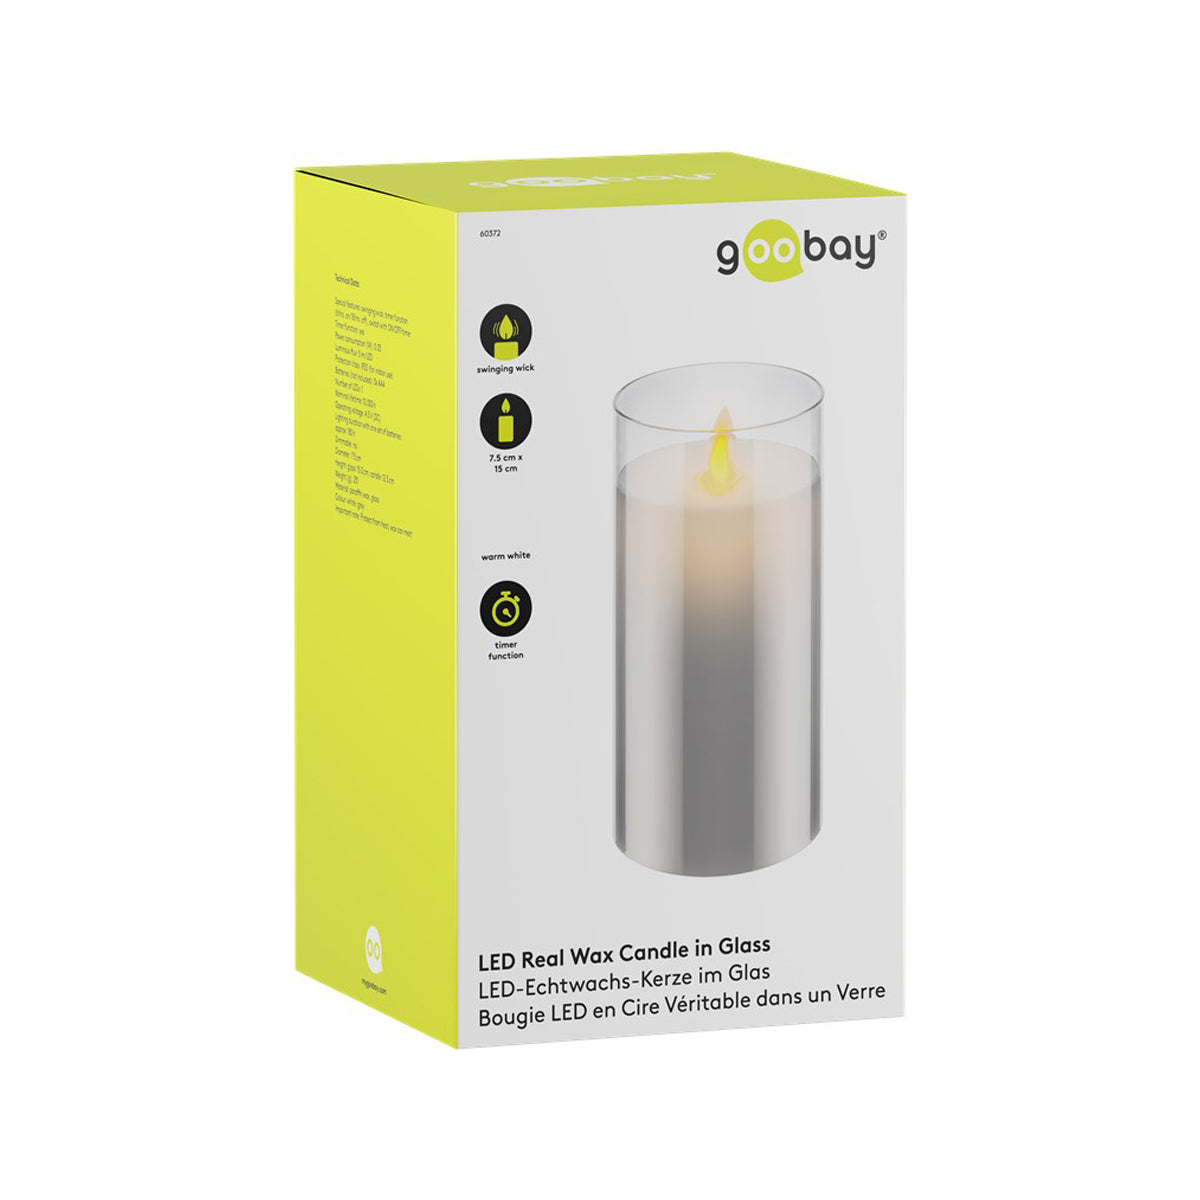 Goobay LED Wax Candle in Glass - 7.5 x 15 cm.